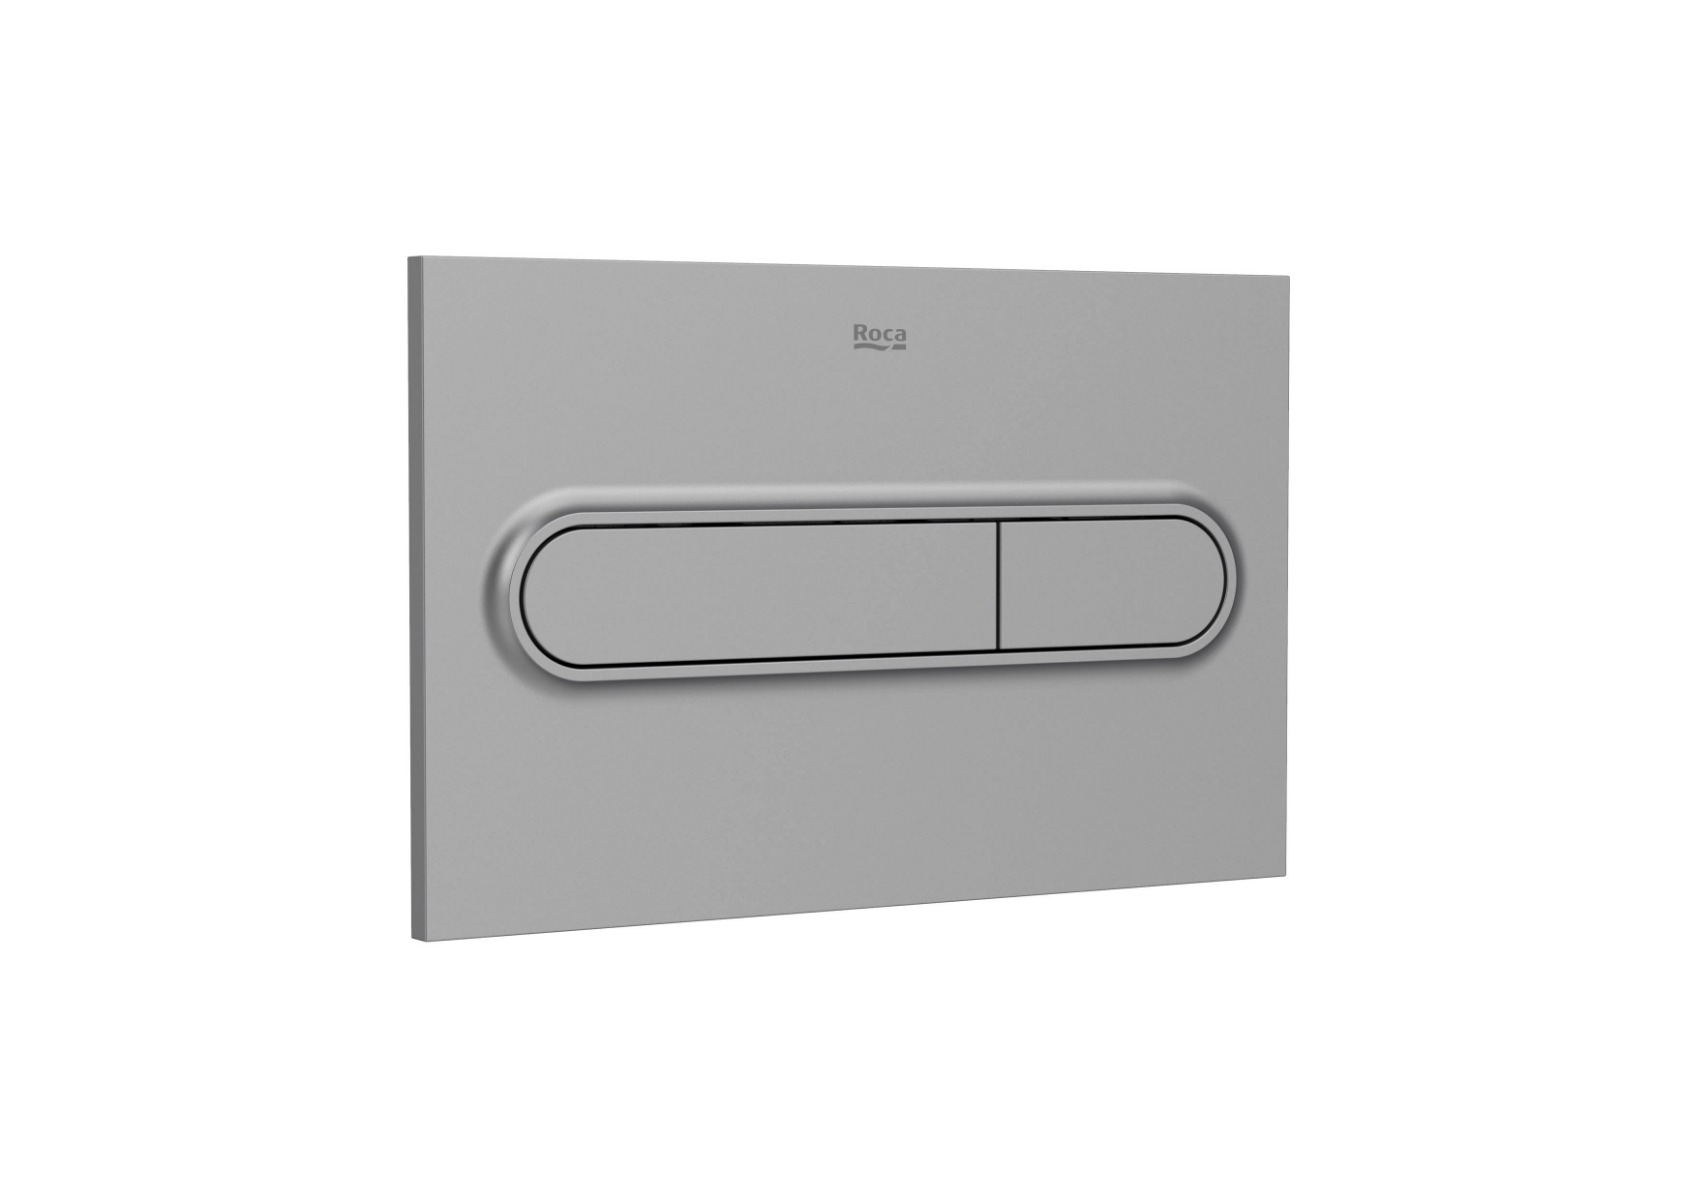 PL1 DUAL - Dual flush operating plate for concealed cistern grey lacquer